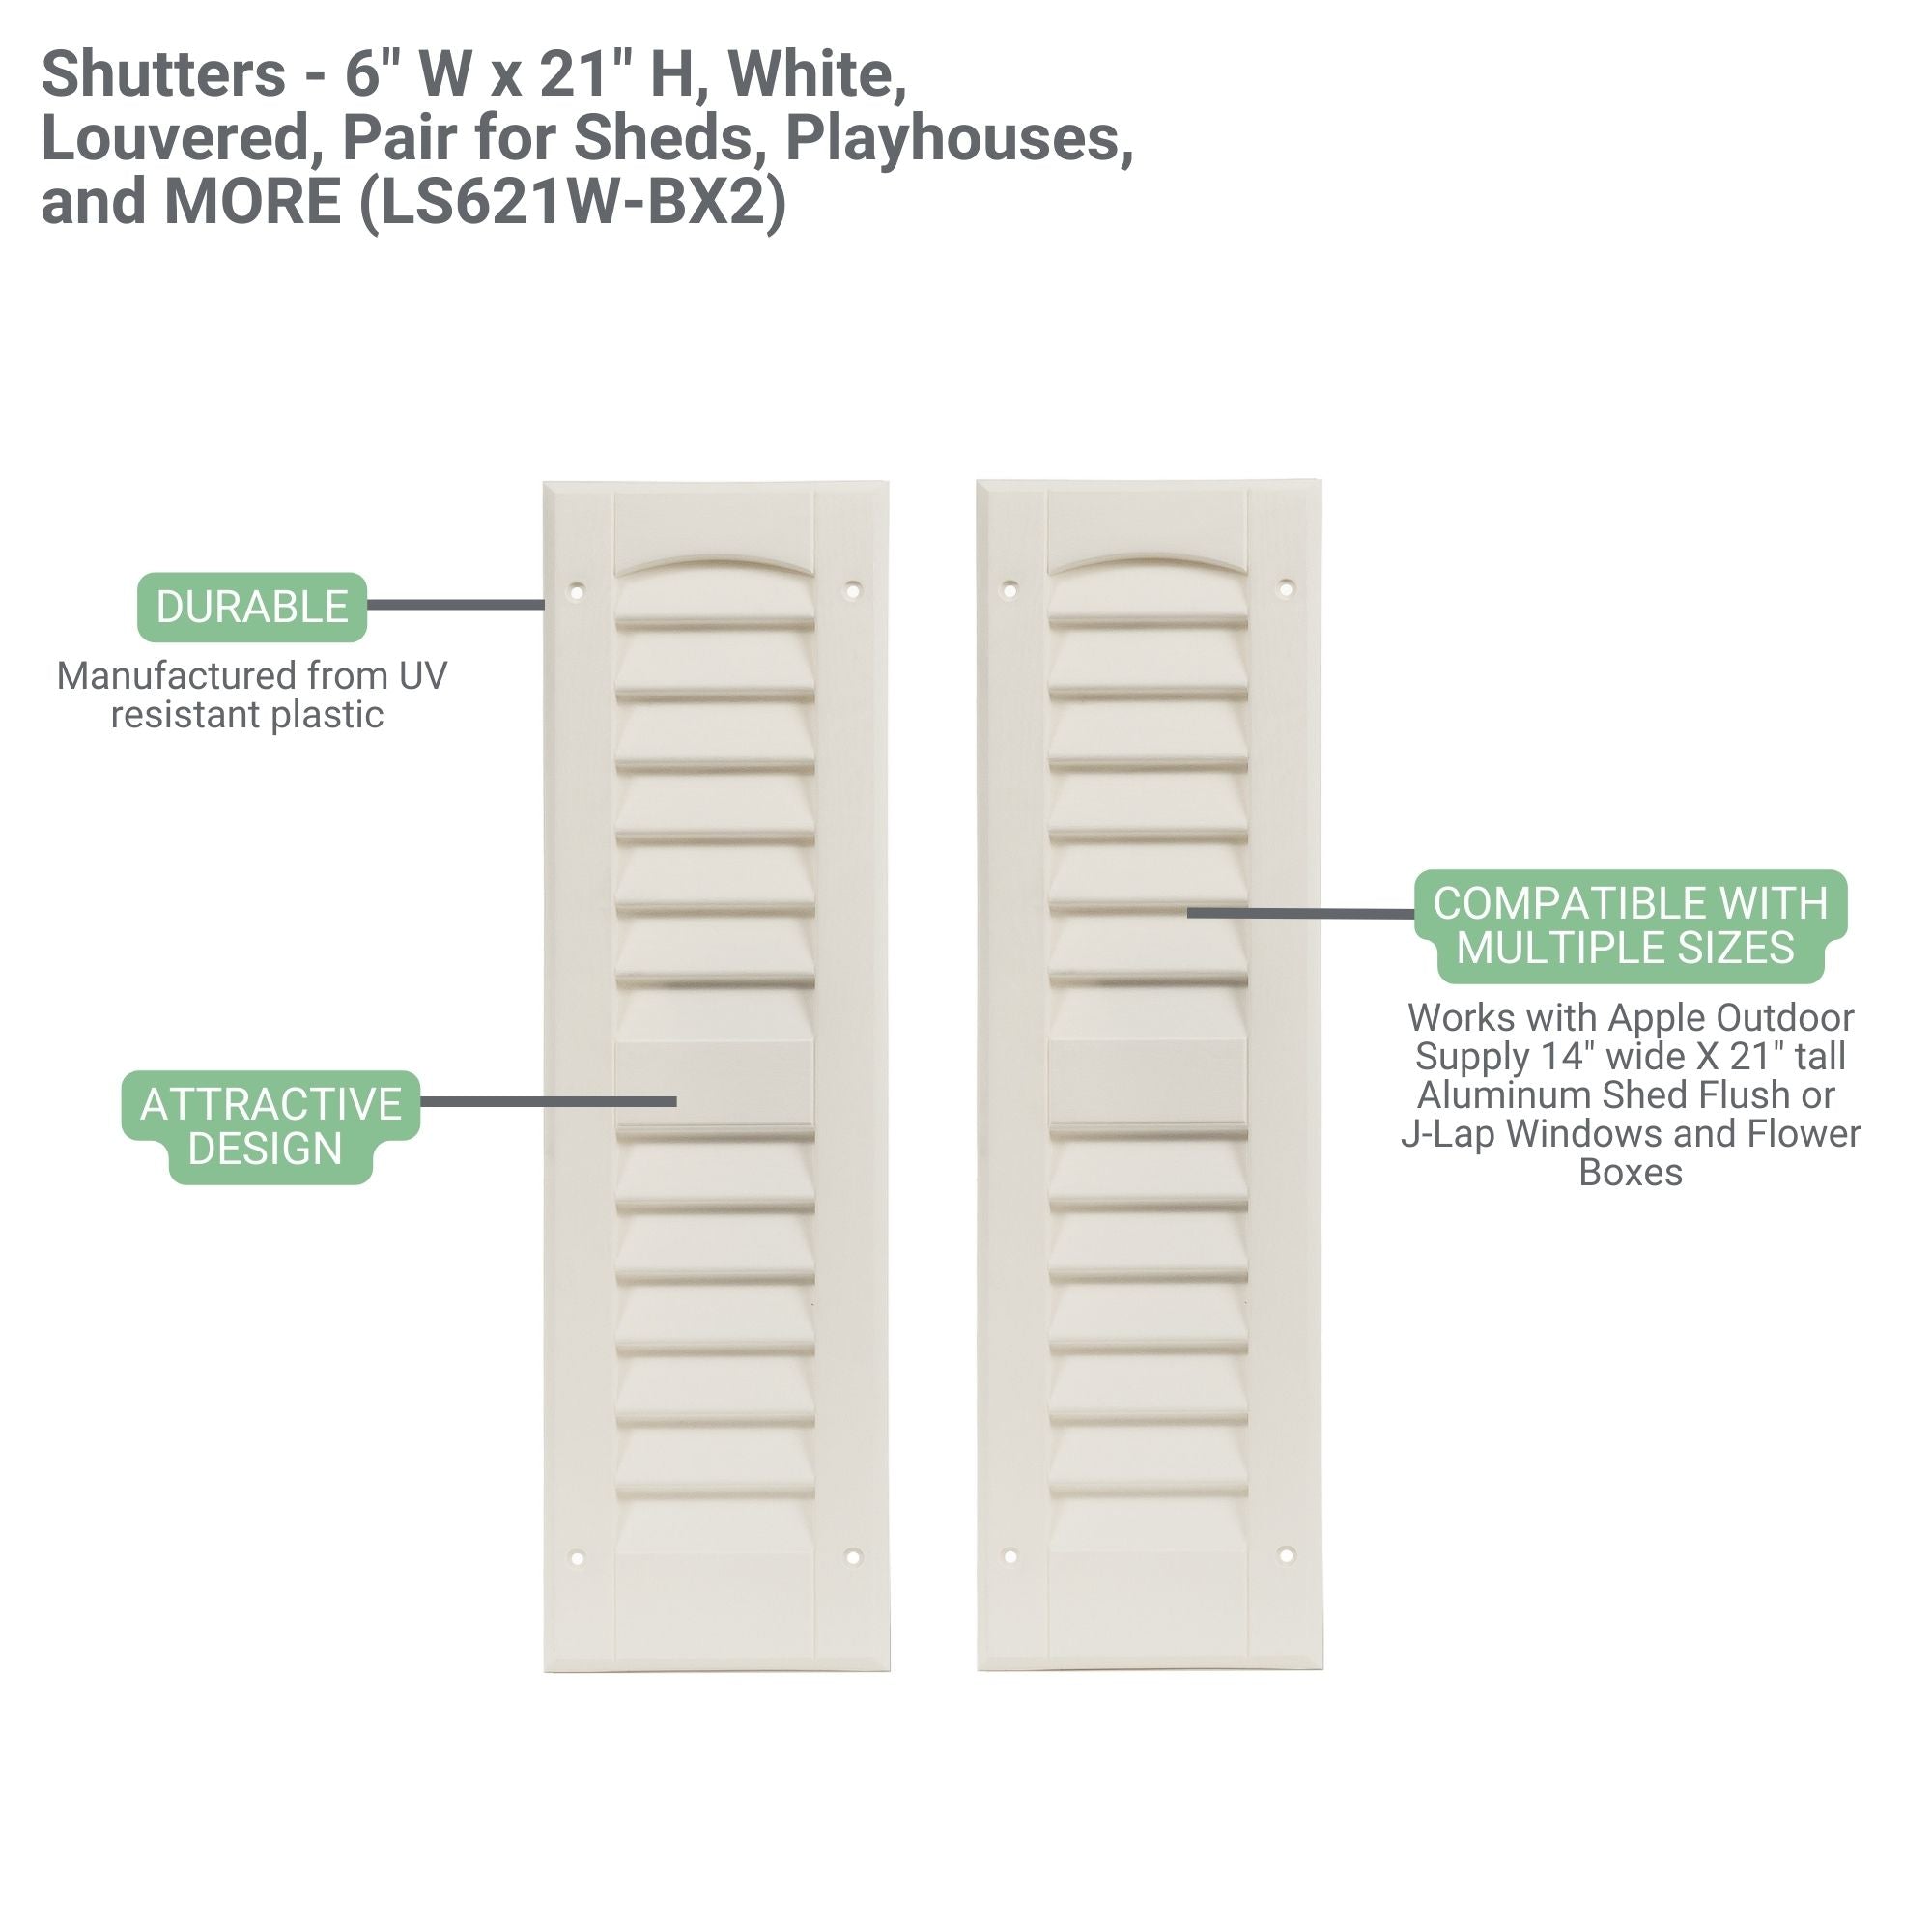 Shutters - 6" W x 21" H Louvered Shutters, 1 Pair